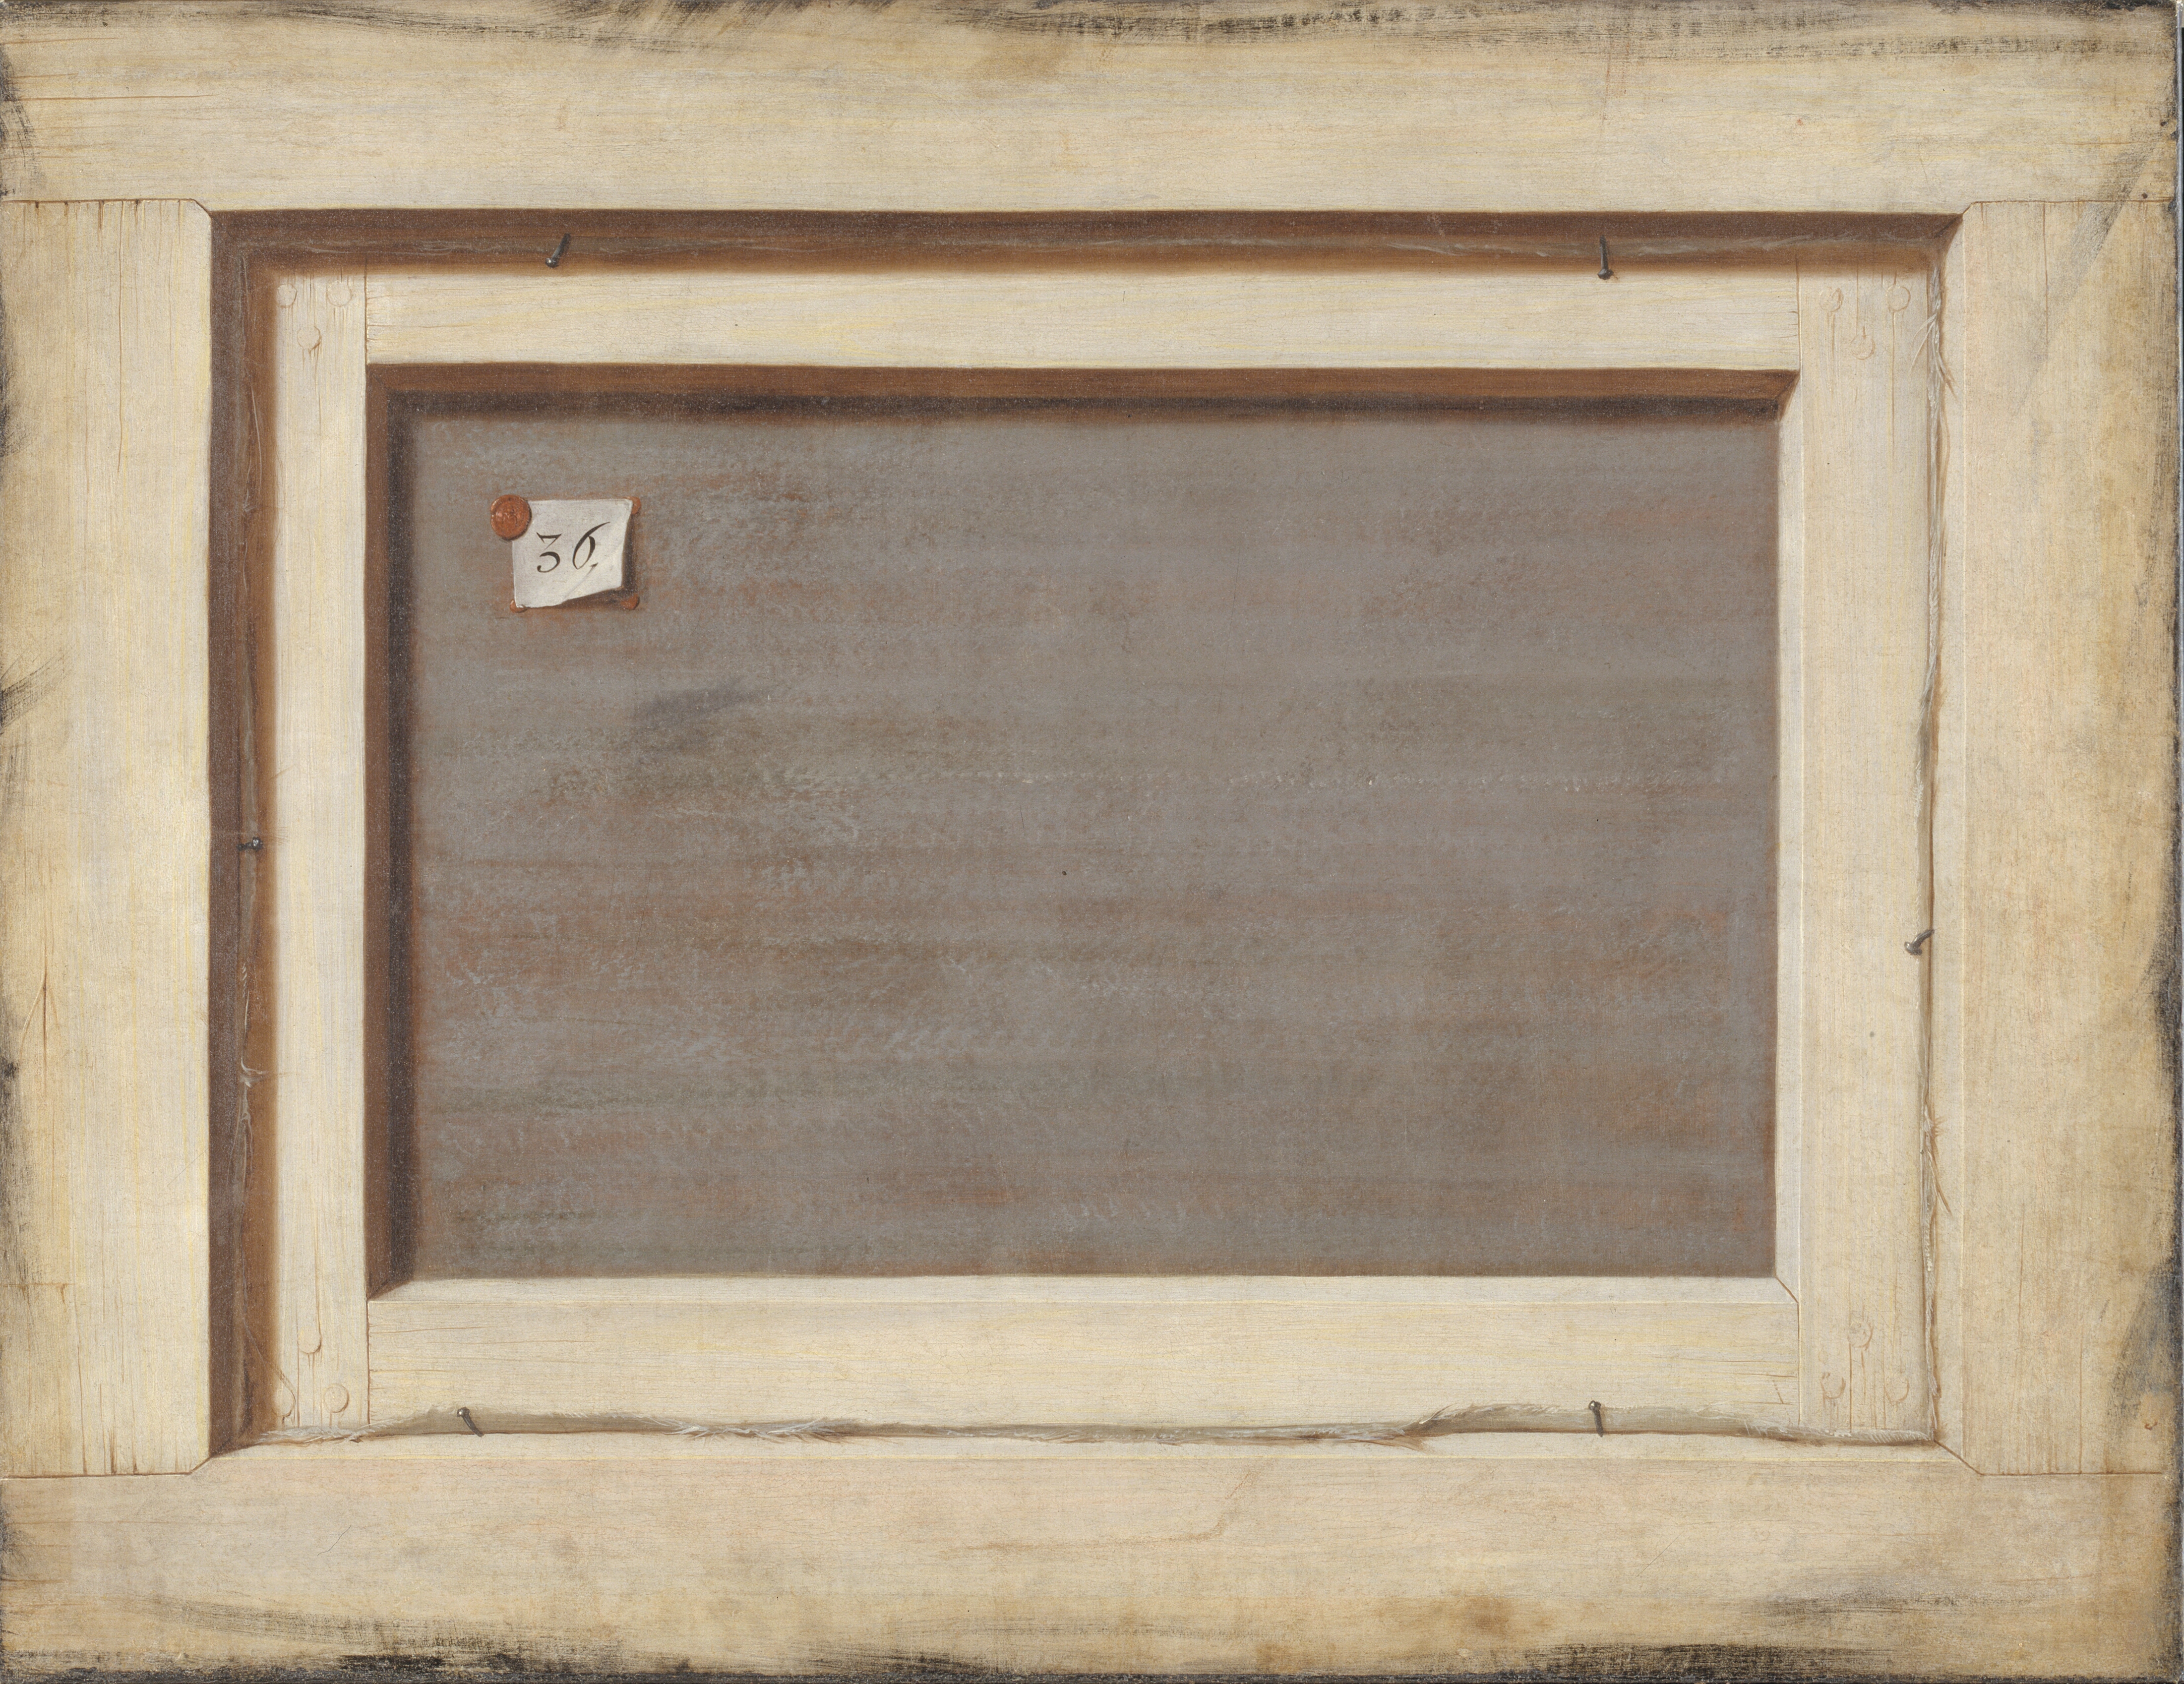 Trompe l'oeil. The Reverse of a Framed Painting by Cornelius Norbertus Gijsbrechts - 1670 - 66.4 x 87 cm Statens Museum for Kunst